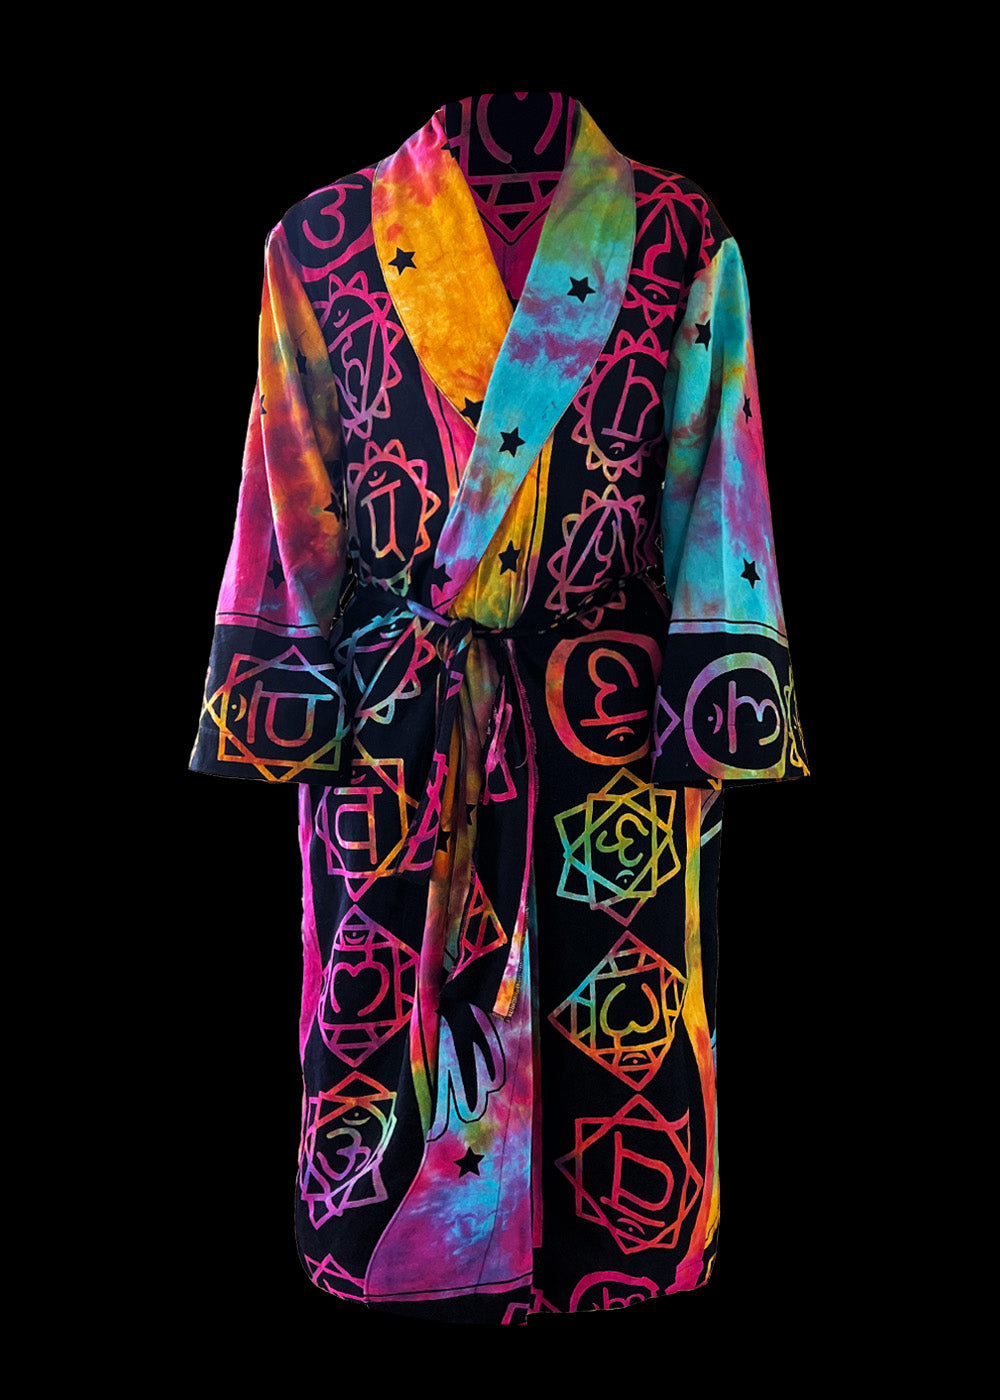 Daddy Robes Becomes Popular Fashion Item Among Stars Amid Pandemic